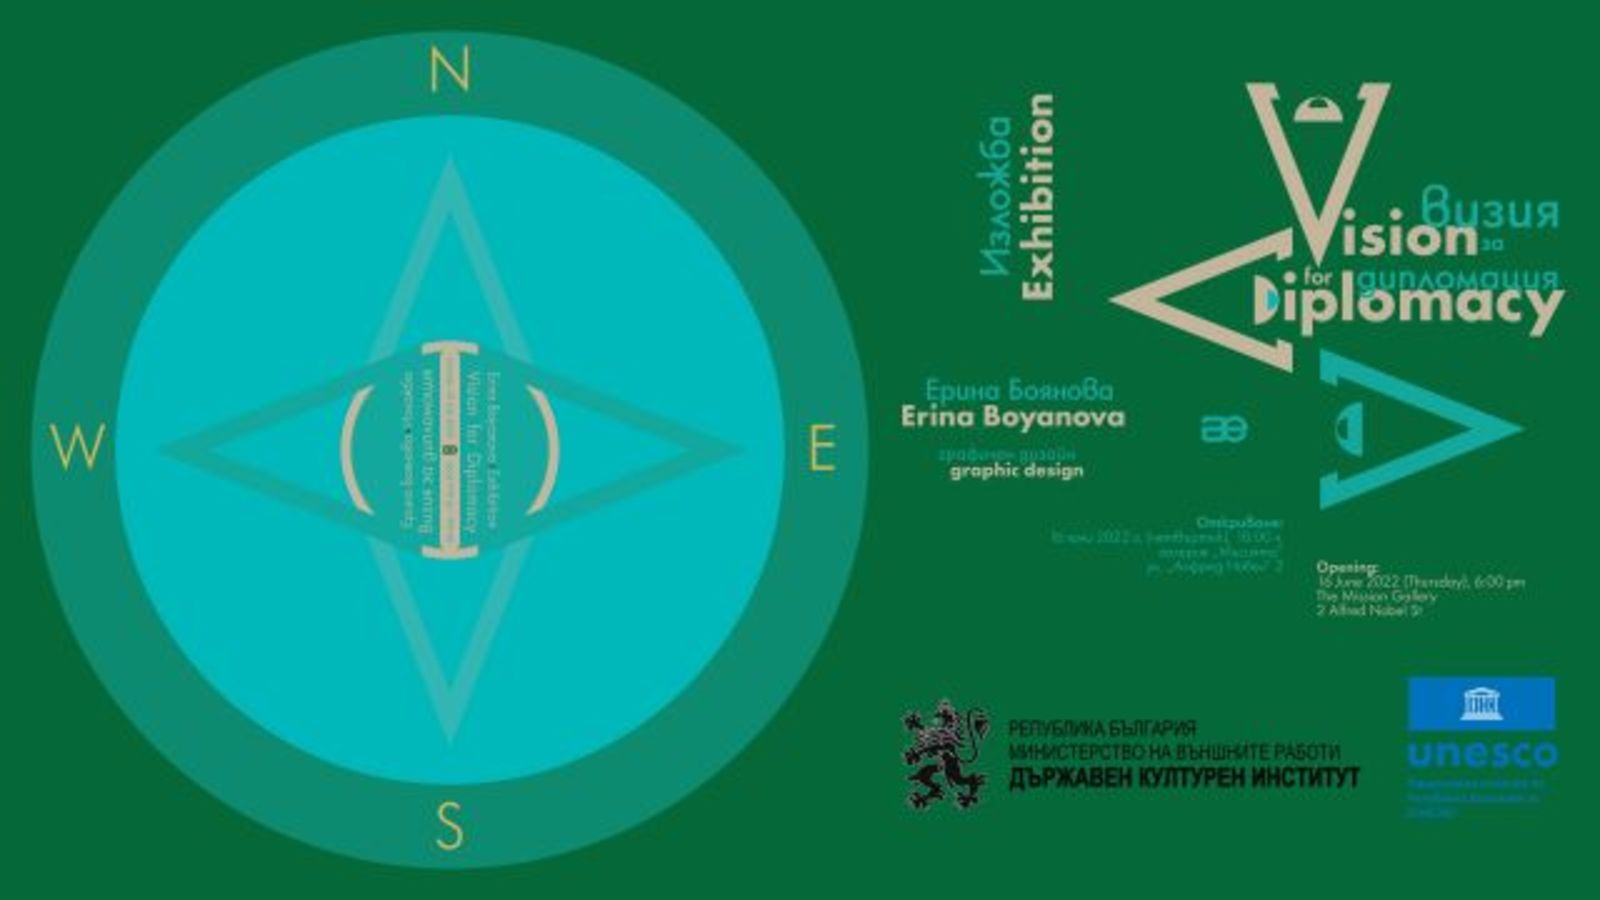 THE MISSION GALLERY PRESENTS THE GRAPHIC EXHIBITION "VISION FOR DIPLOMACY" BY ERINA BOYANOVA